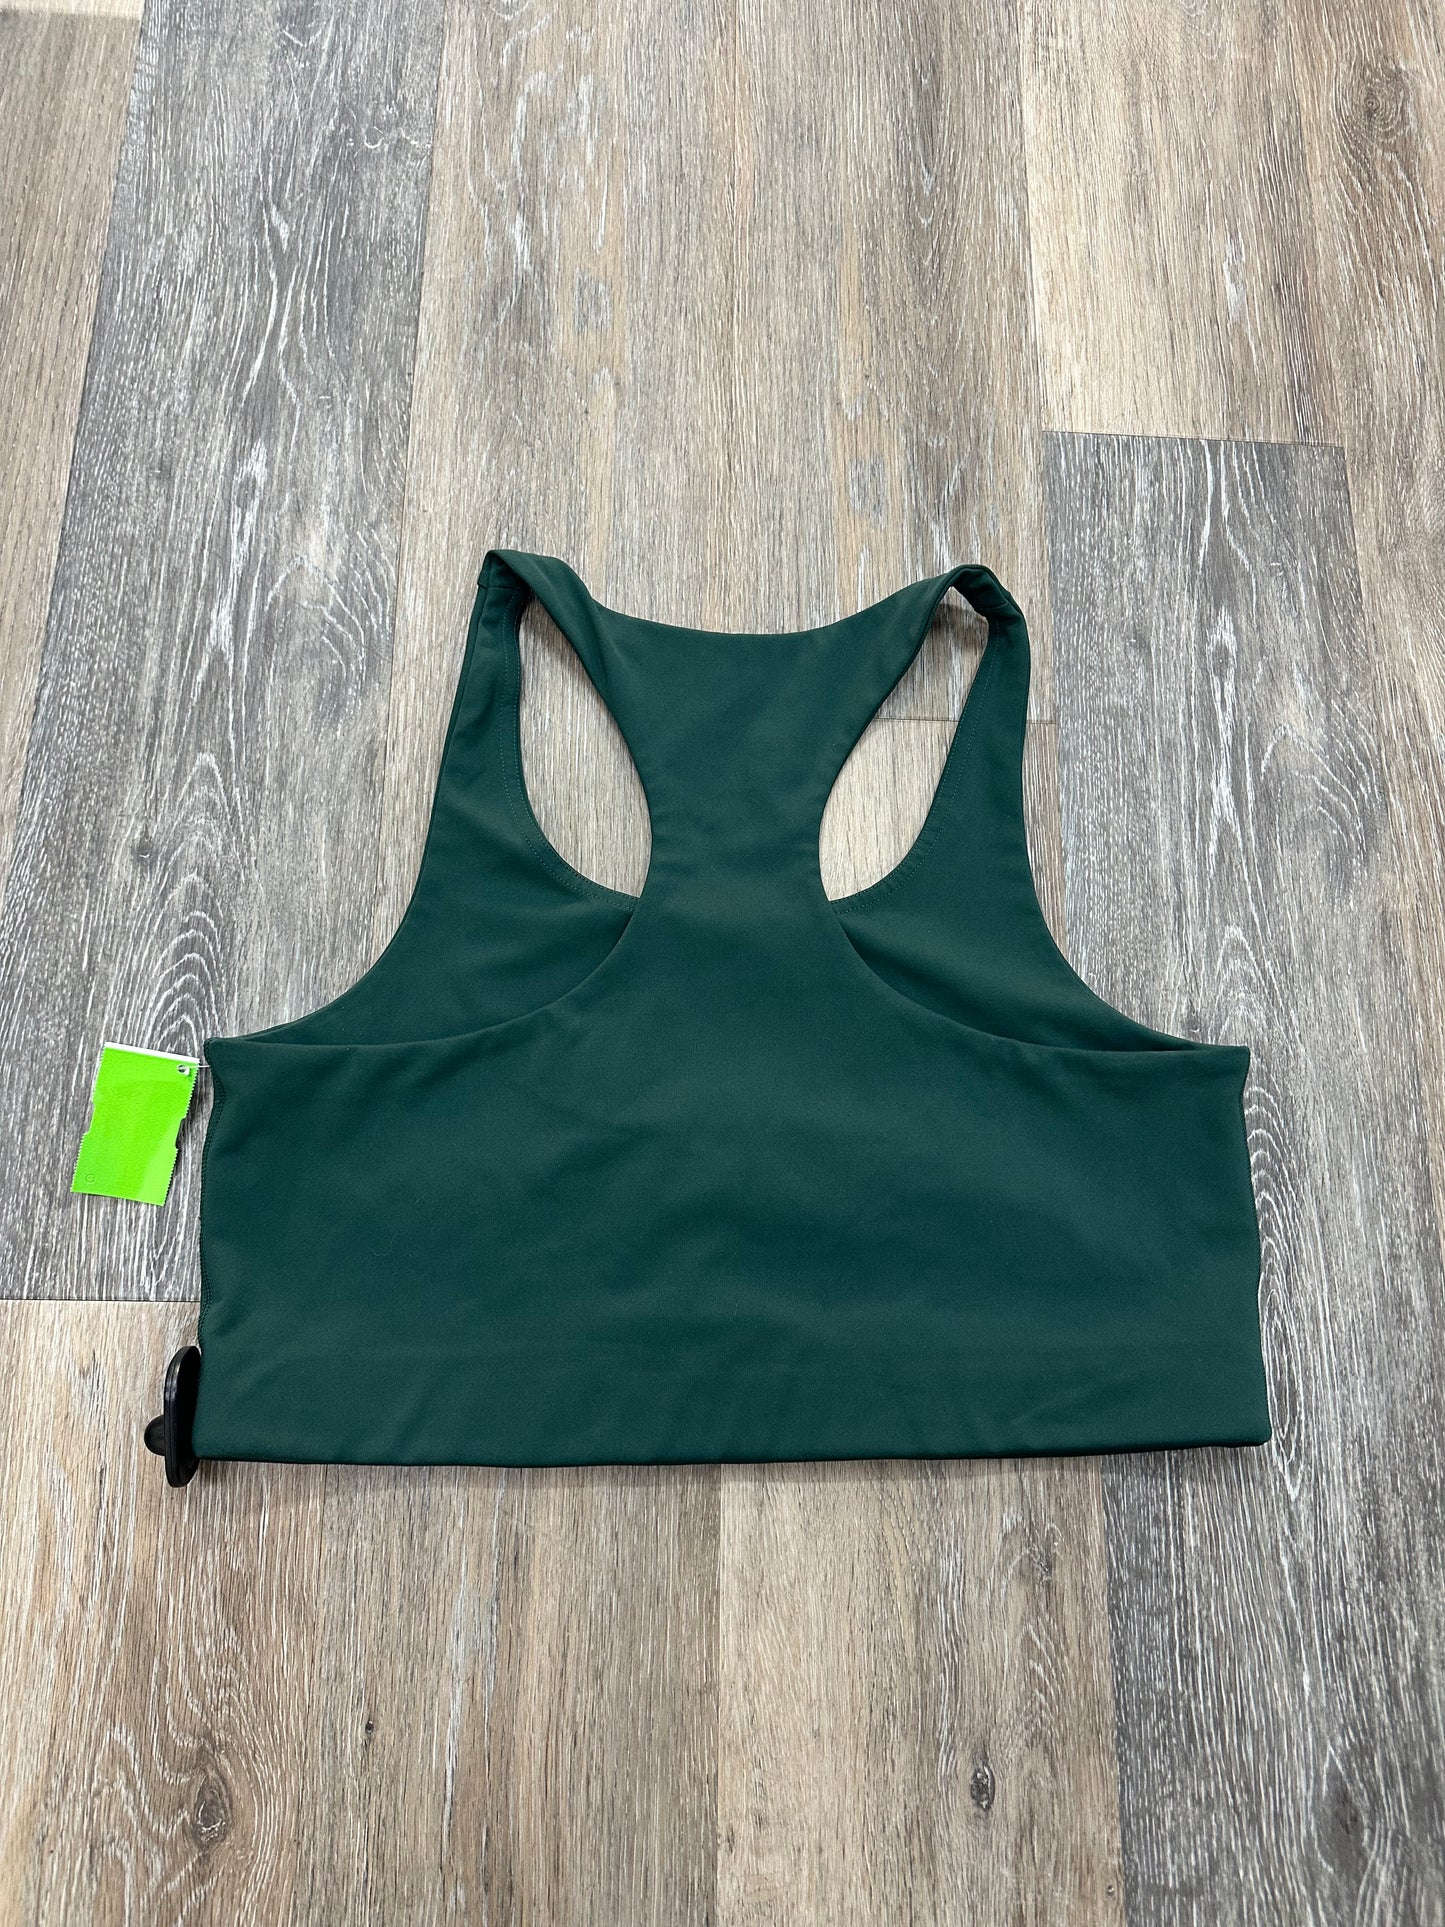 Athletic Bra By Girlfriend Collective  Size: Xxl